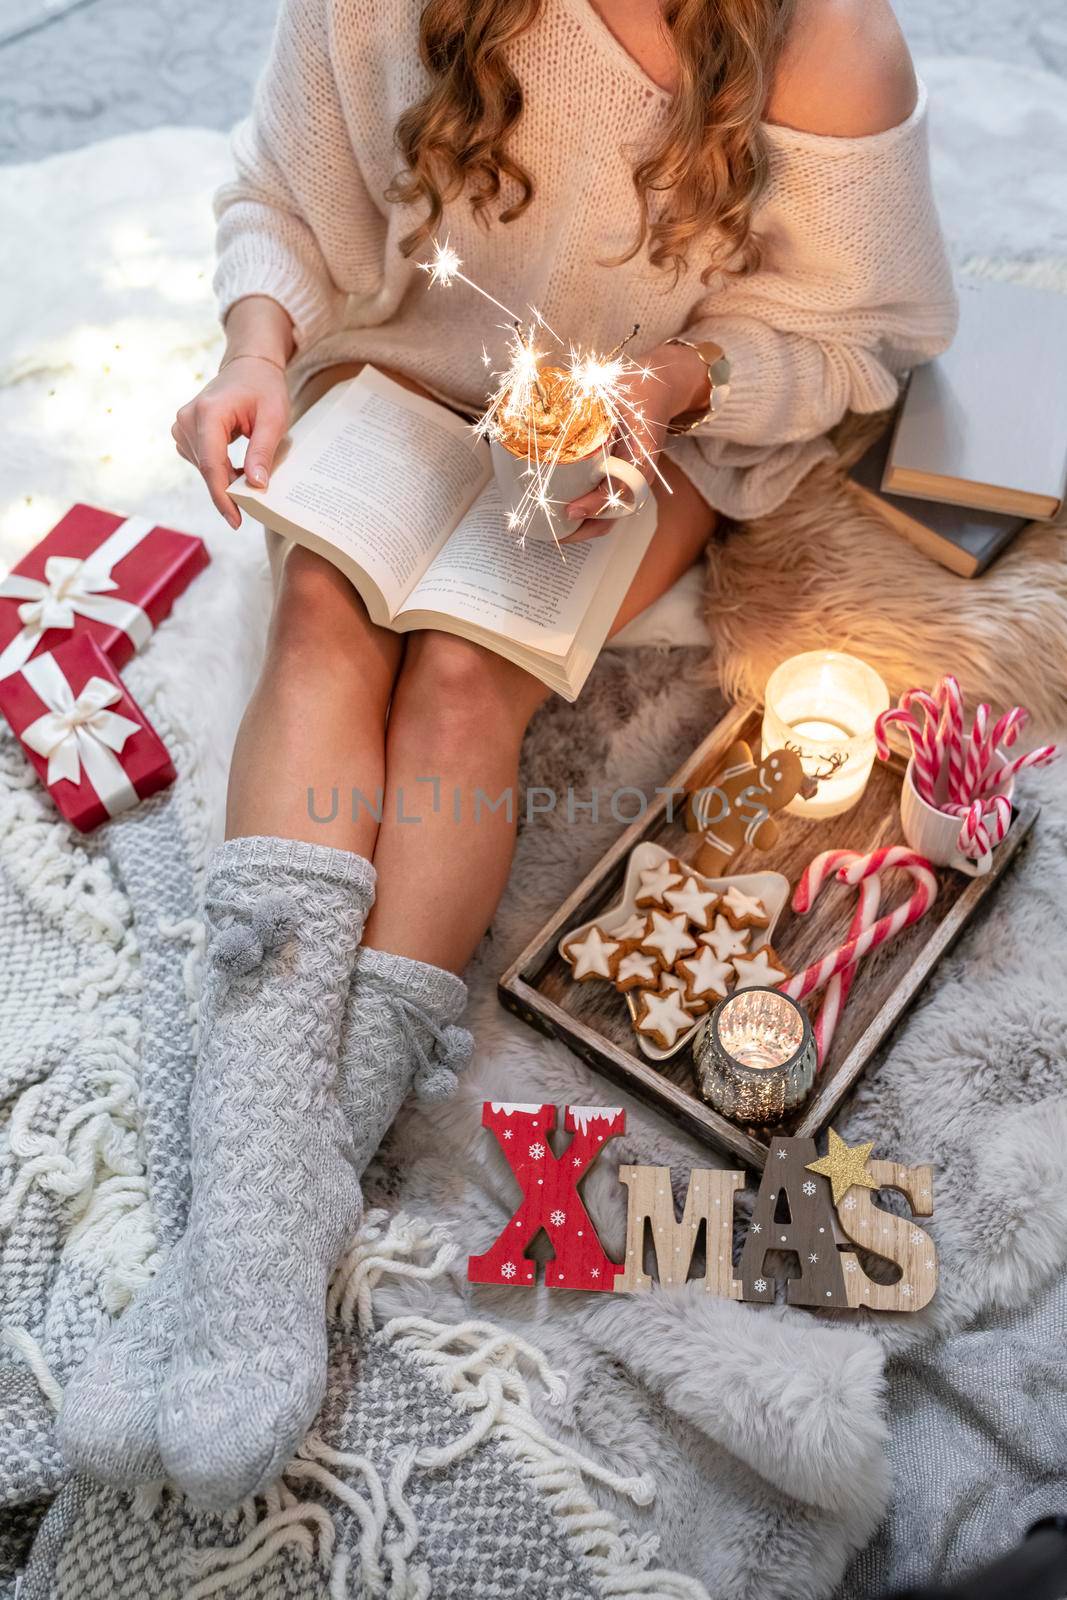 The girl is sitting in a christmas atmosphere, drinking a hot drink and reading a book by gitusik